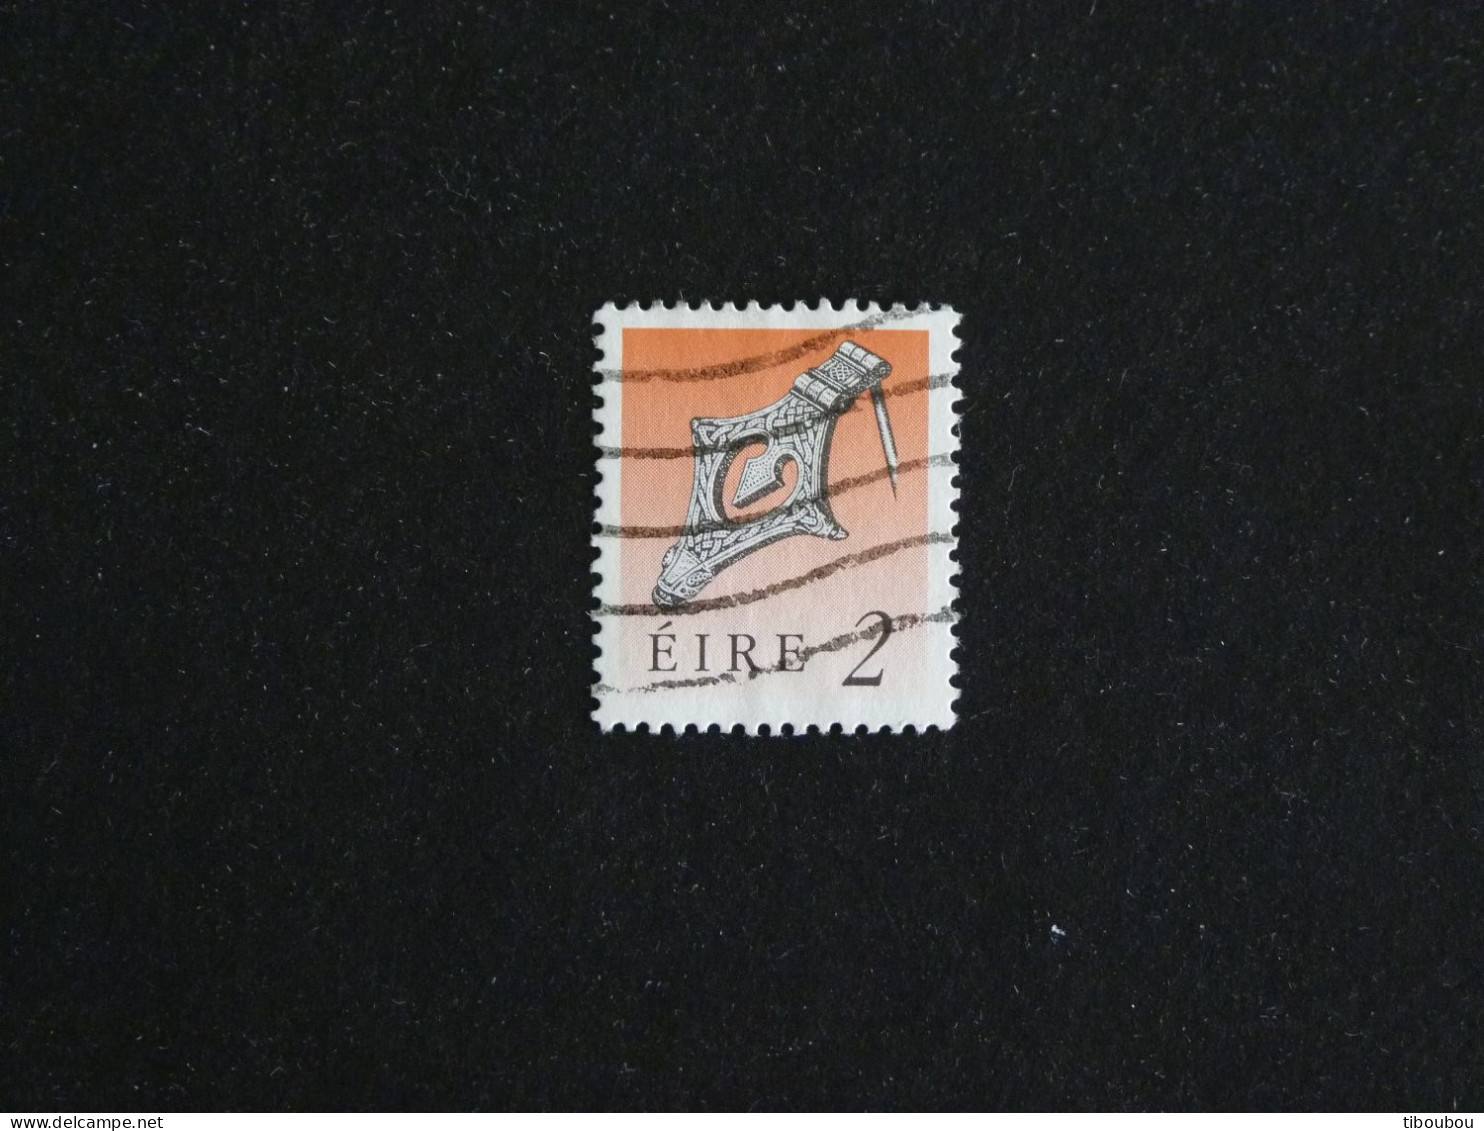 IRLANDE IRELAND EIRE YT 727 OBLITERE - BROCHE SILVER KITE - Used Stamps